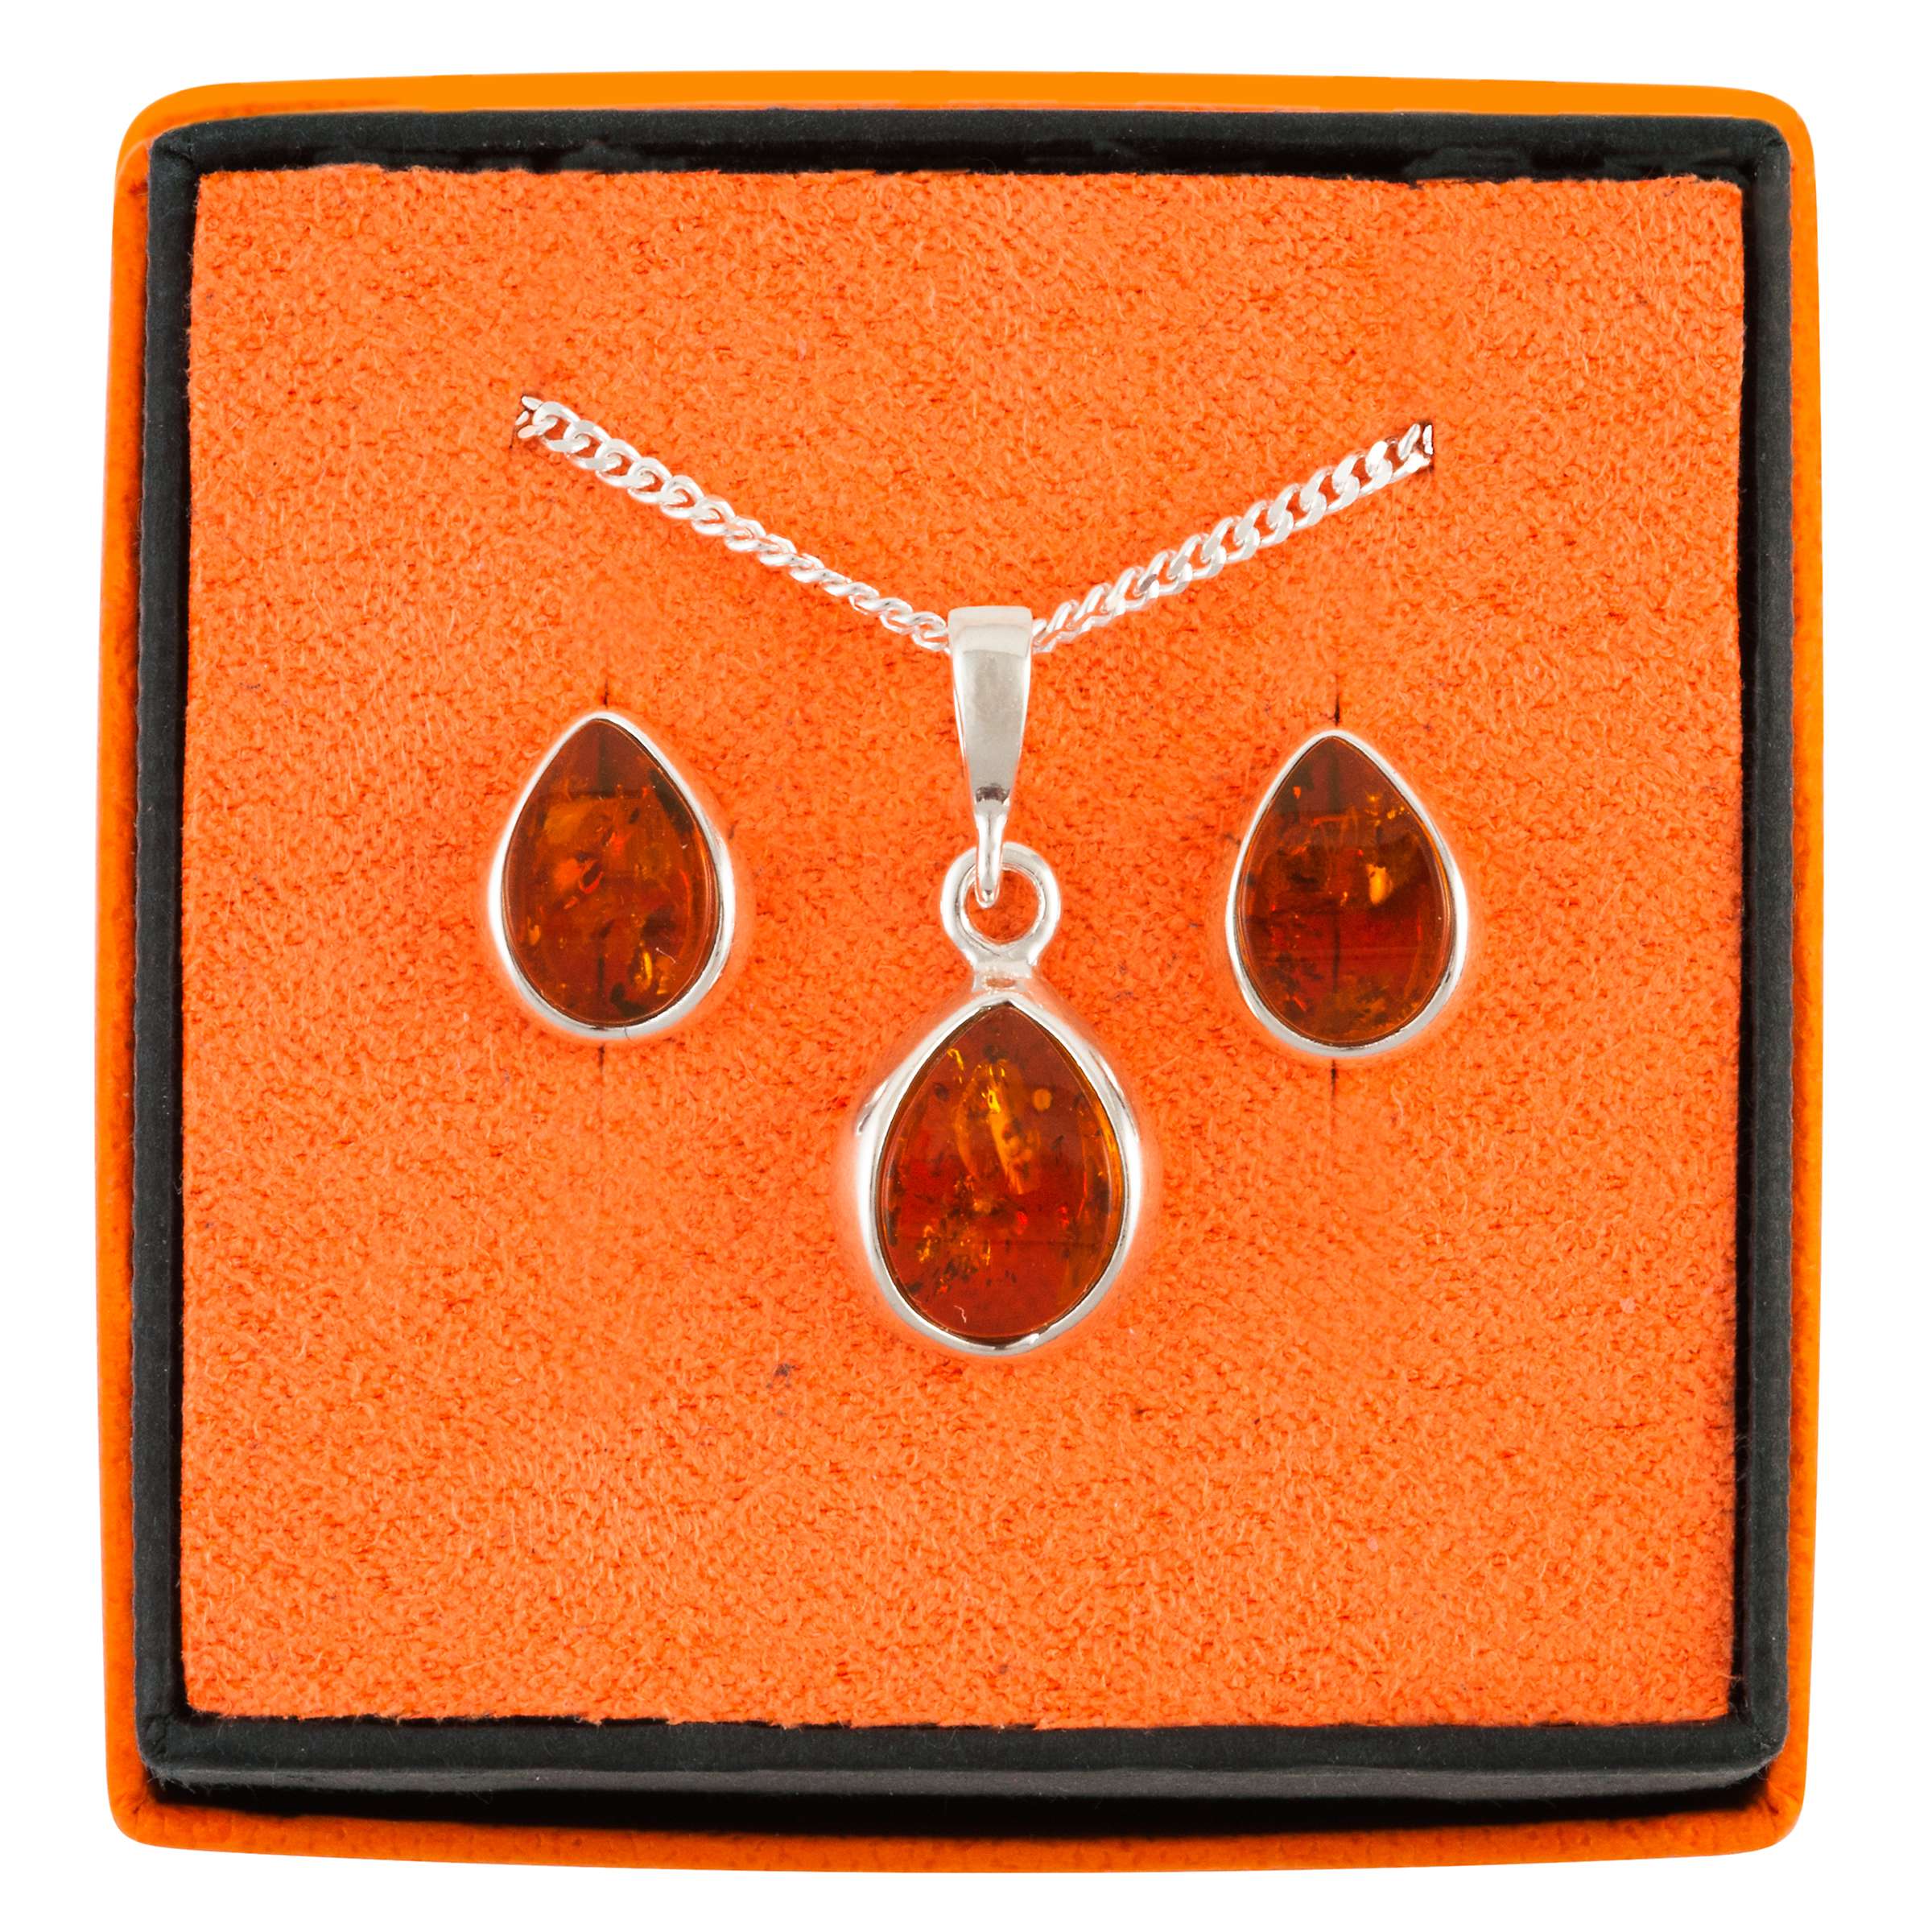 Buy Be-Jewelled Sterling Silver Tear Drop Amber Pendant Necklace And Earrings Gift Set, Amber Online at johnlewis.com